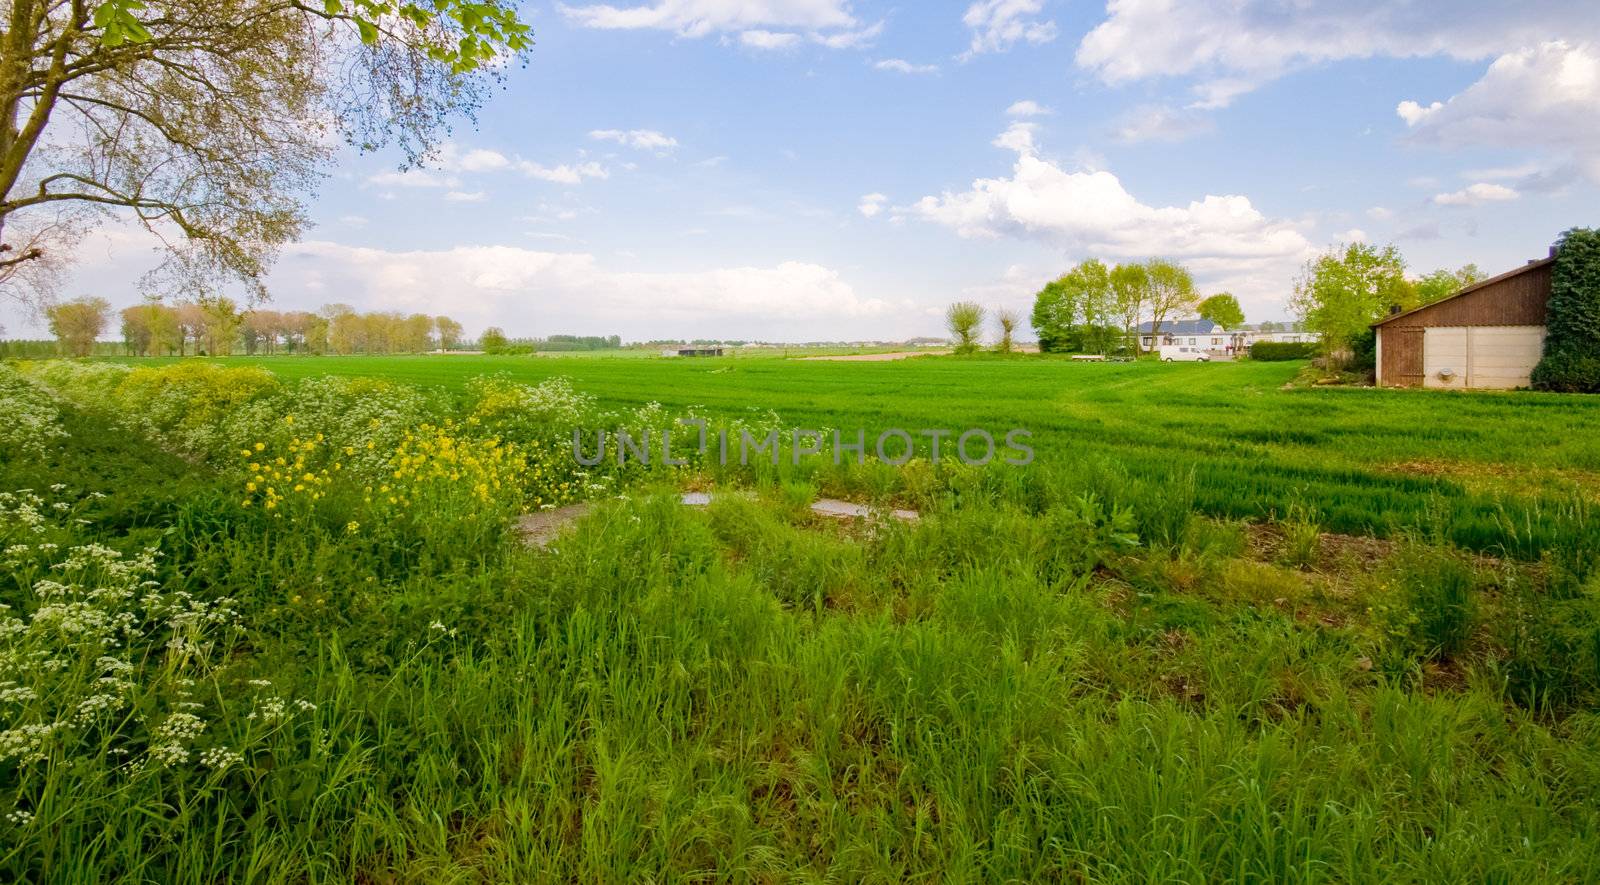 lovely bright green pasture farm landscape with some clouds and blue sky